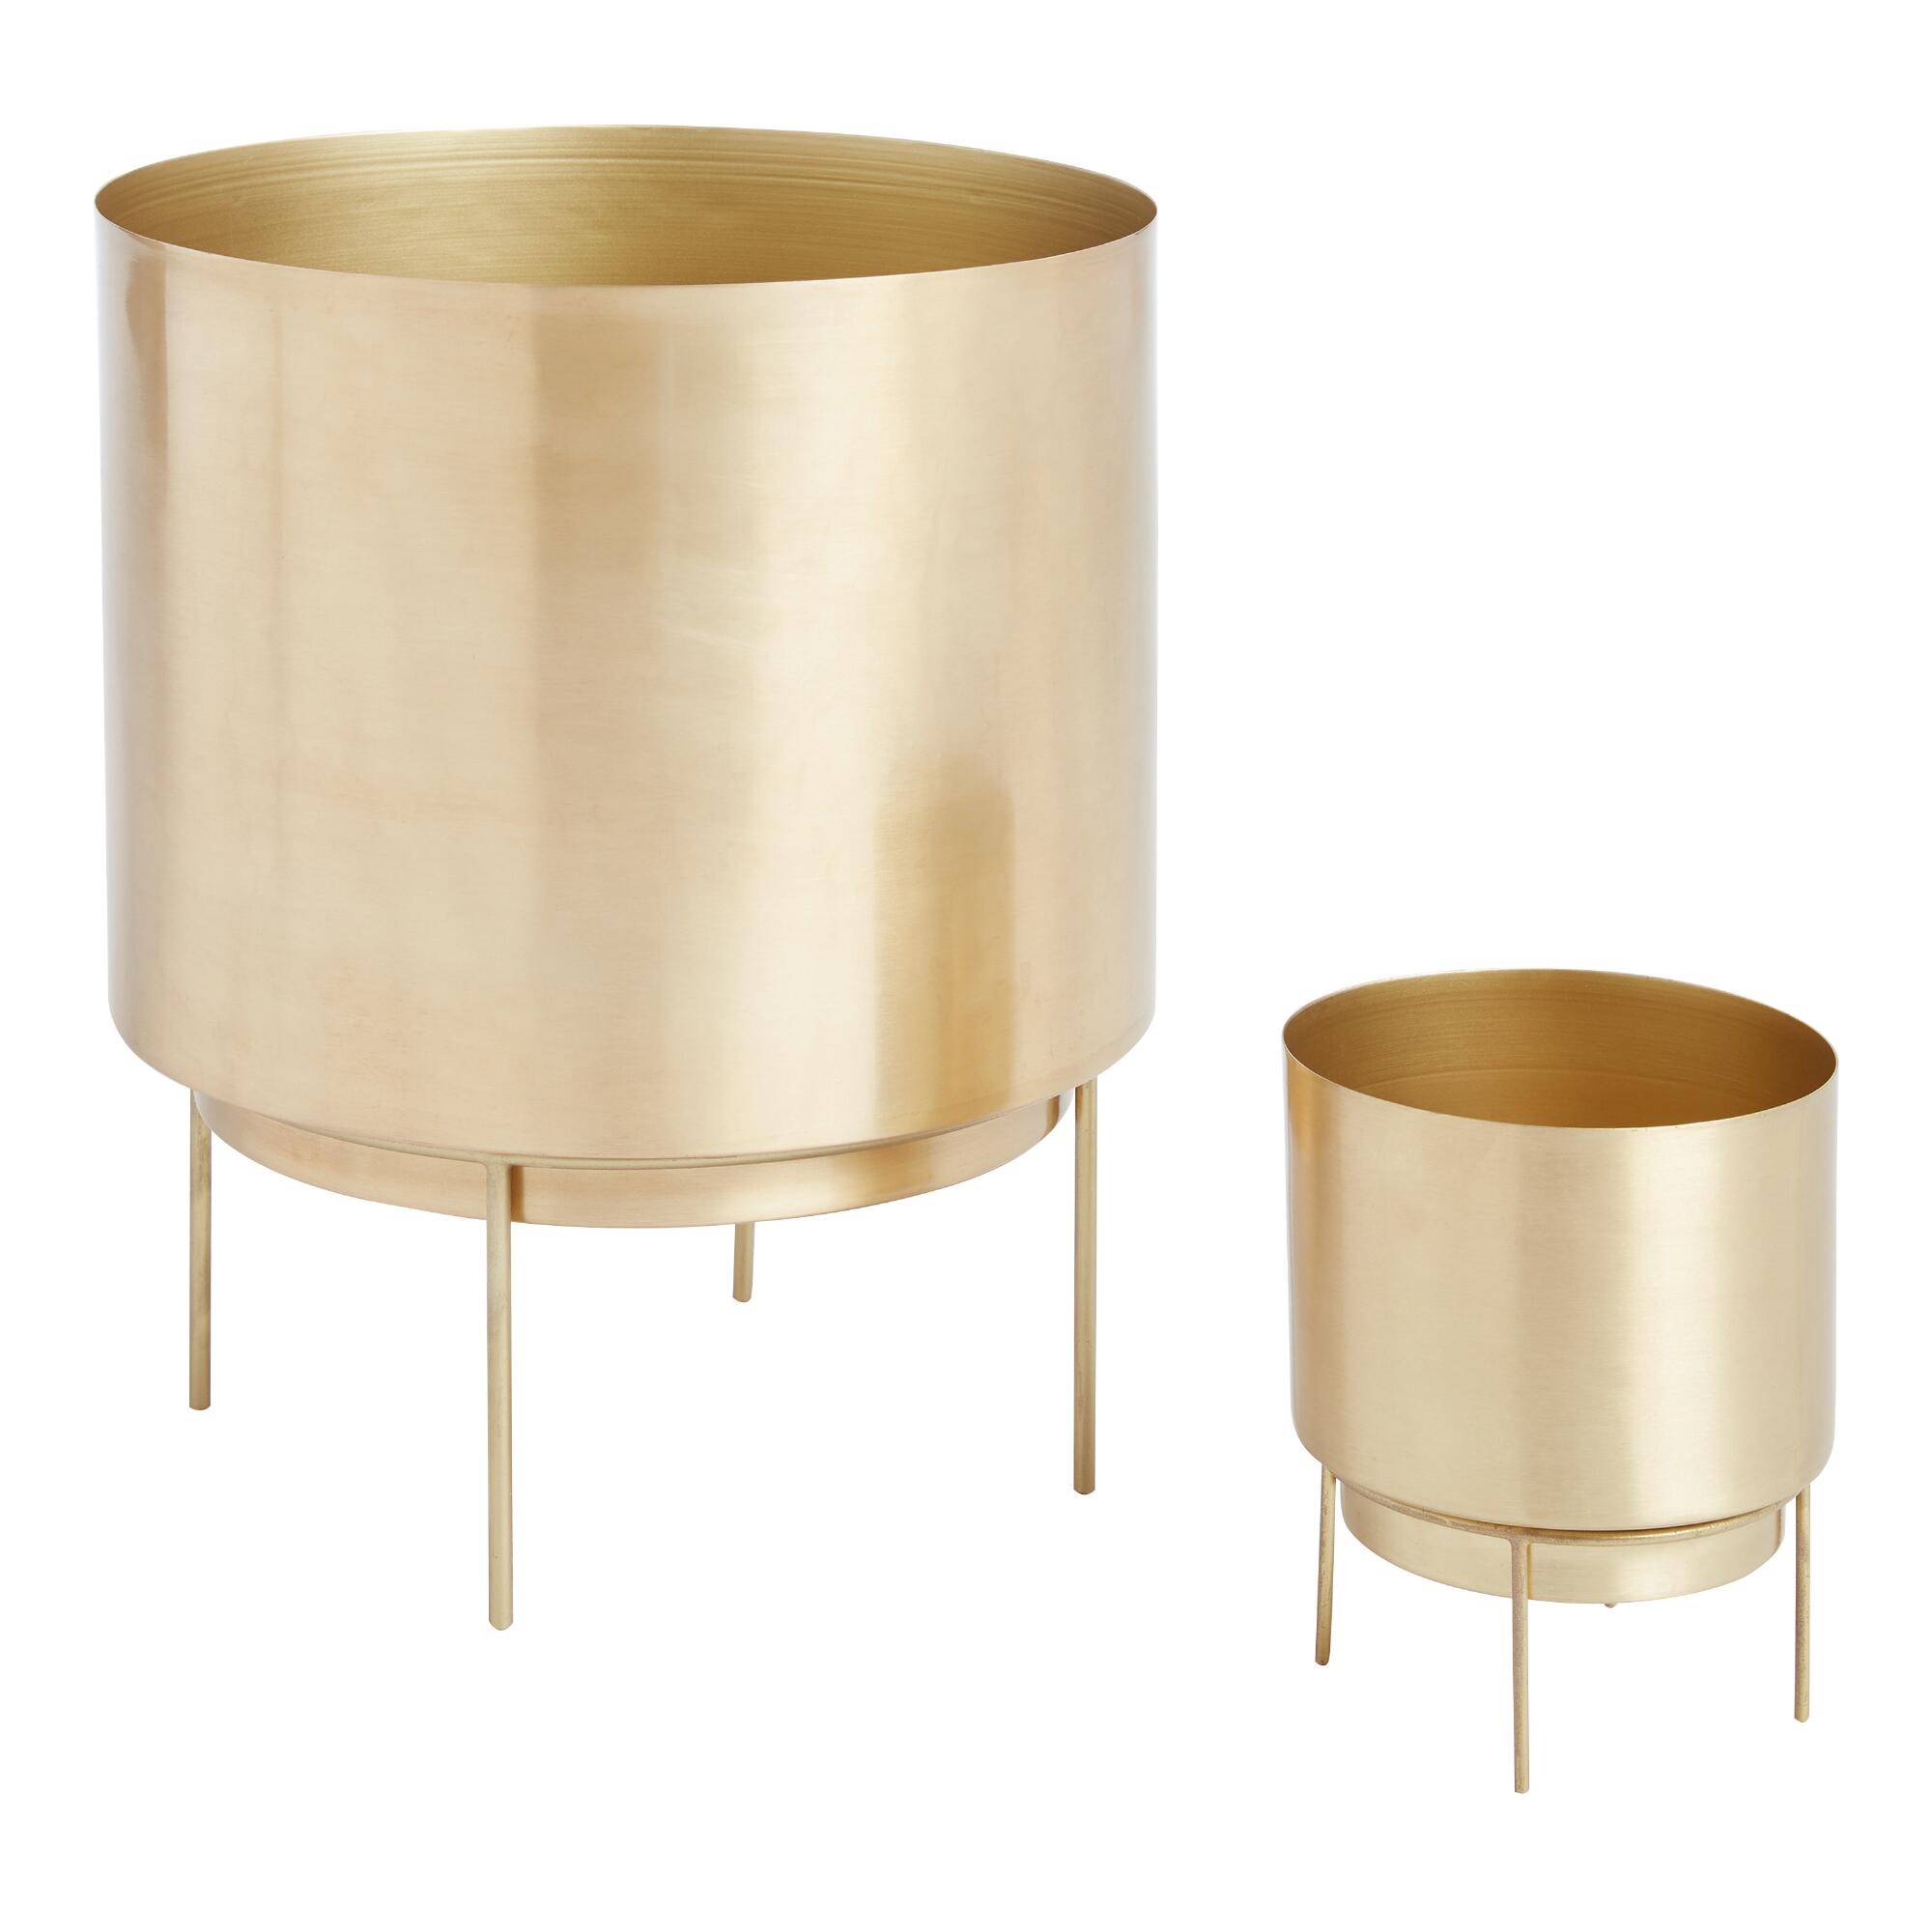 Brushed Gold Planter with Stand - Metal by World Market